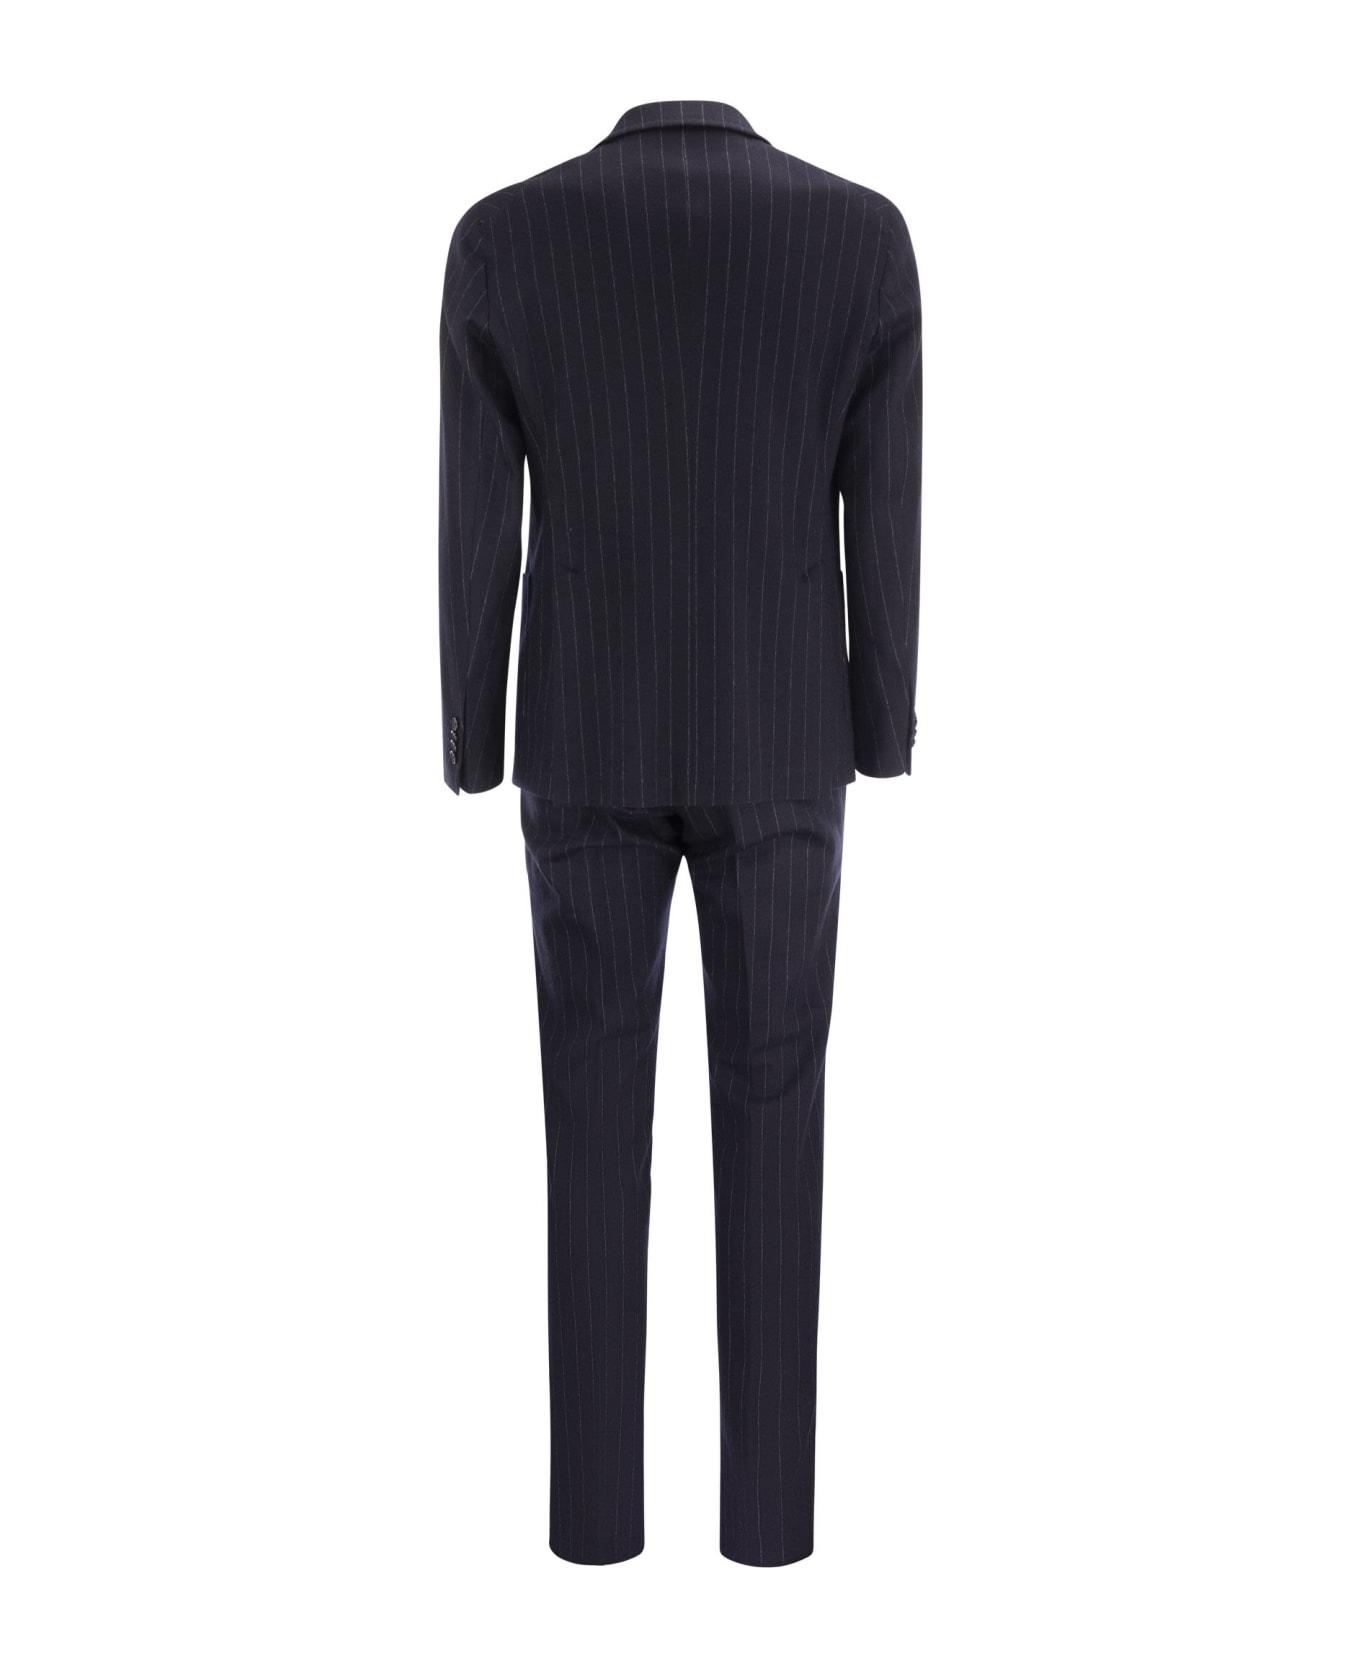 Tagliatore Wool And Cotton Suit - Blue スーツ